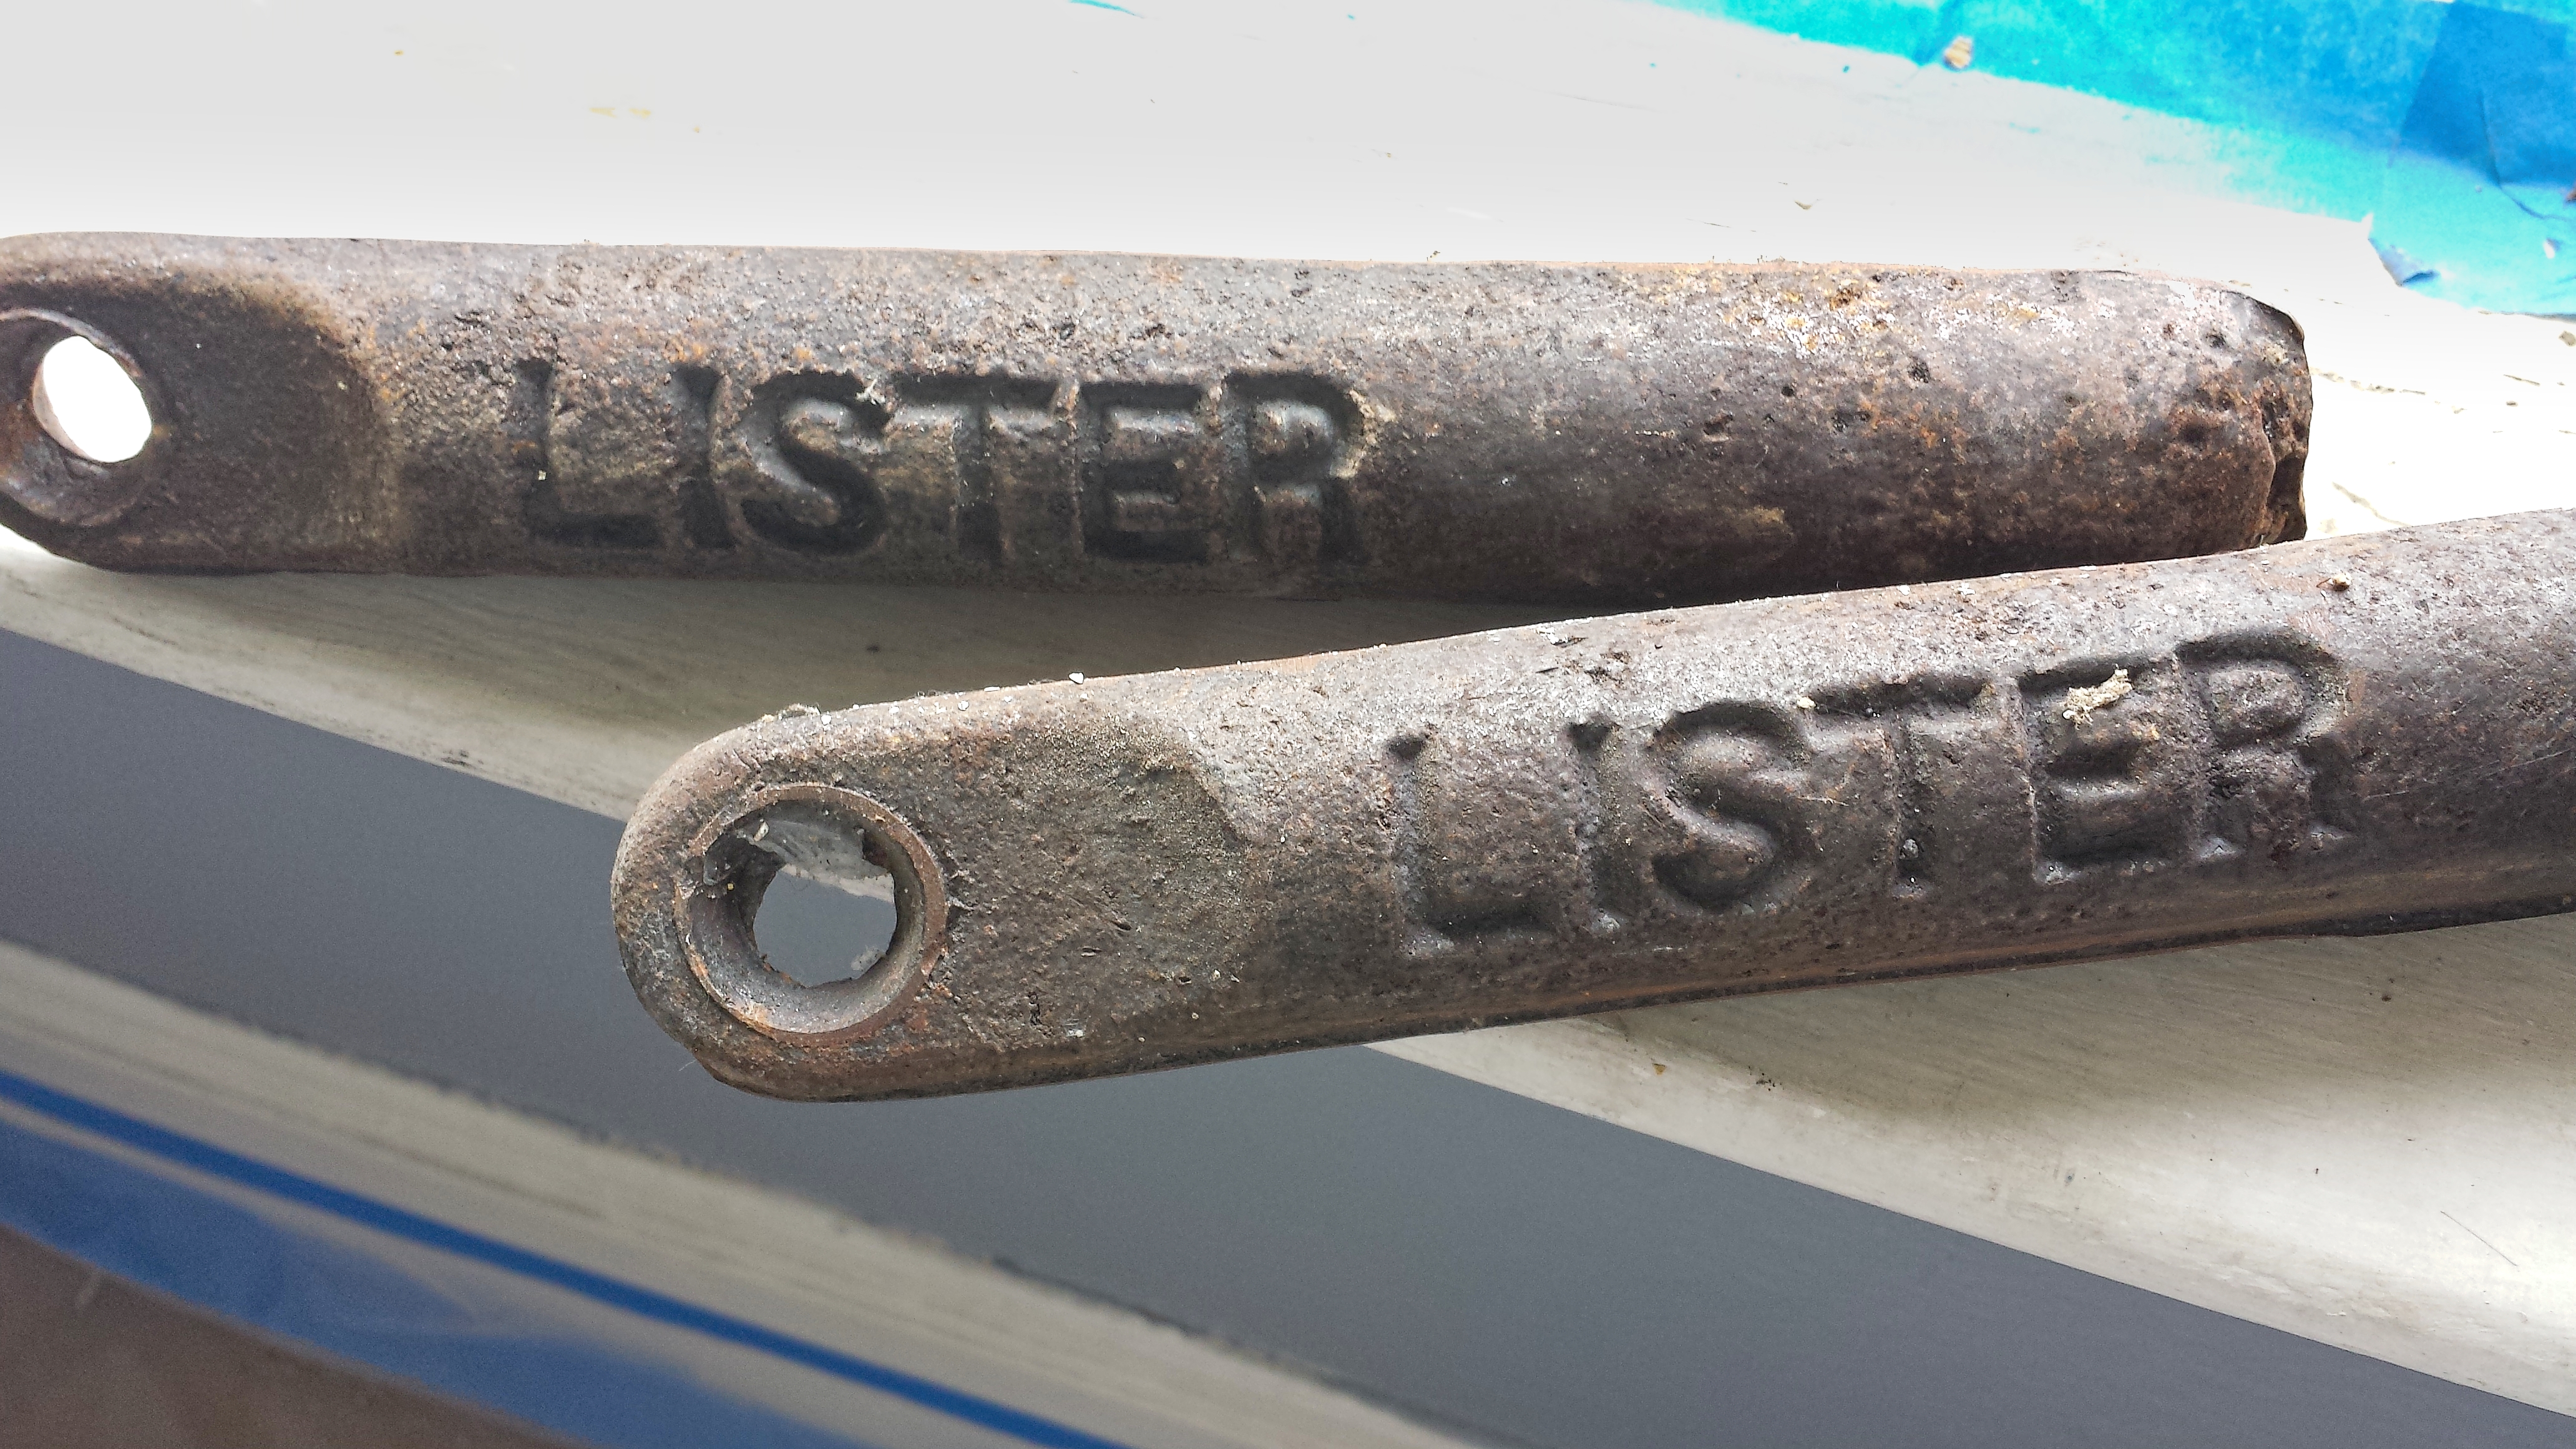 Old weights were made of cast iron. Lister is presumed to be the craftsperson who made these weights.